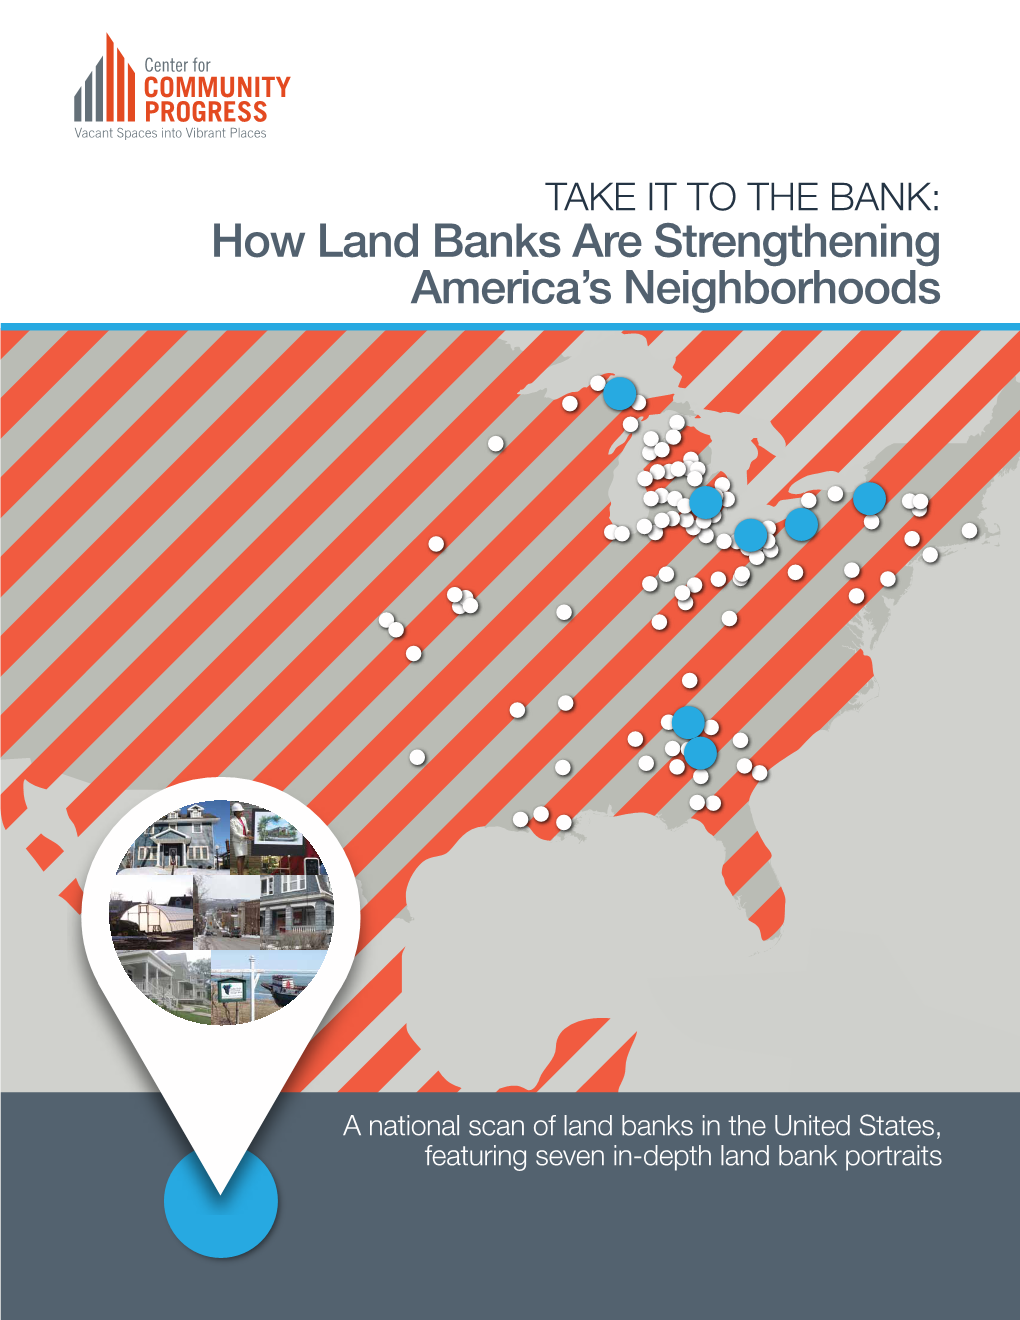 Take It to the Bank: How Land Banks Are Strengthening America's